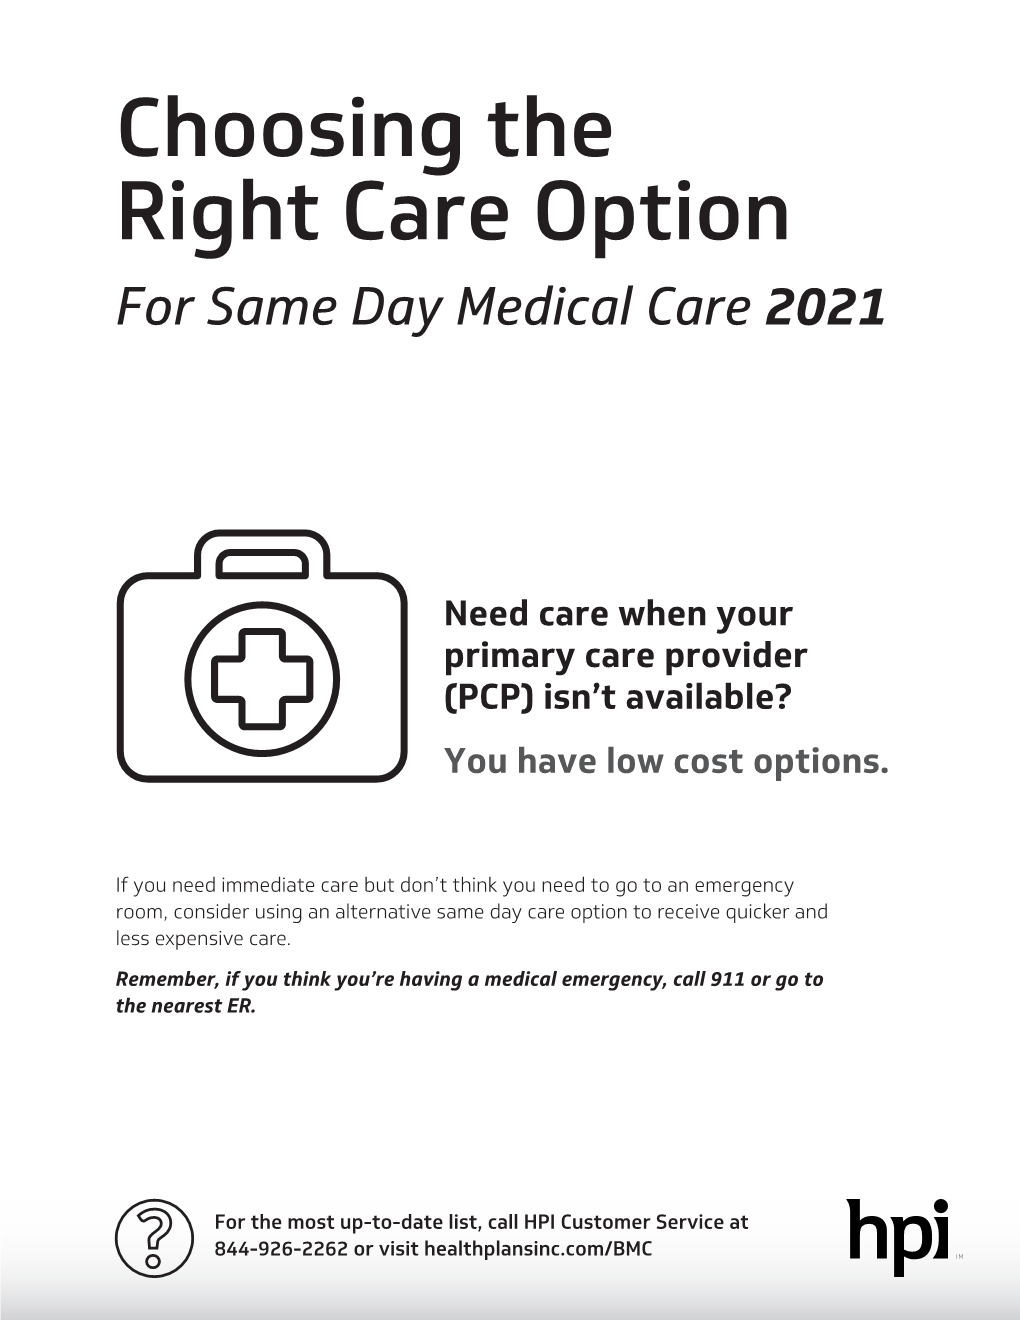 Choosing the Right Care Option for Same Day Medical Care 2021